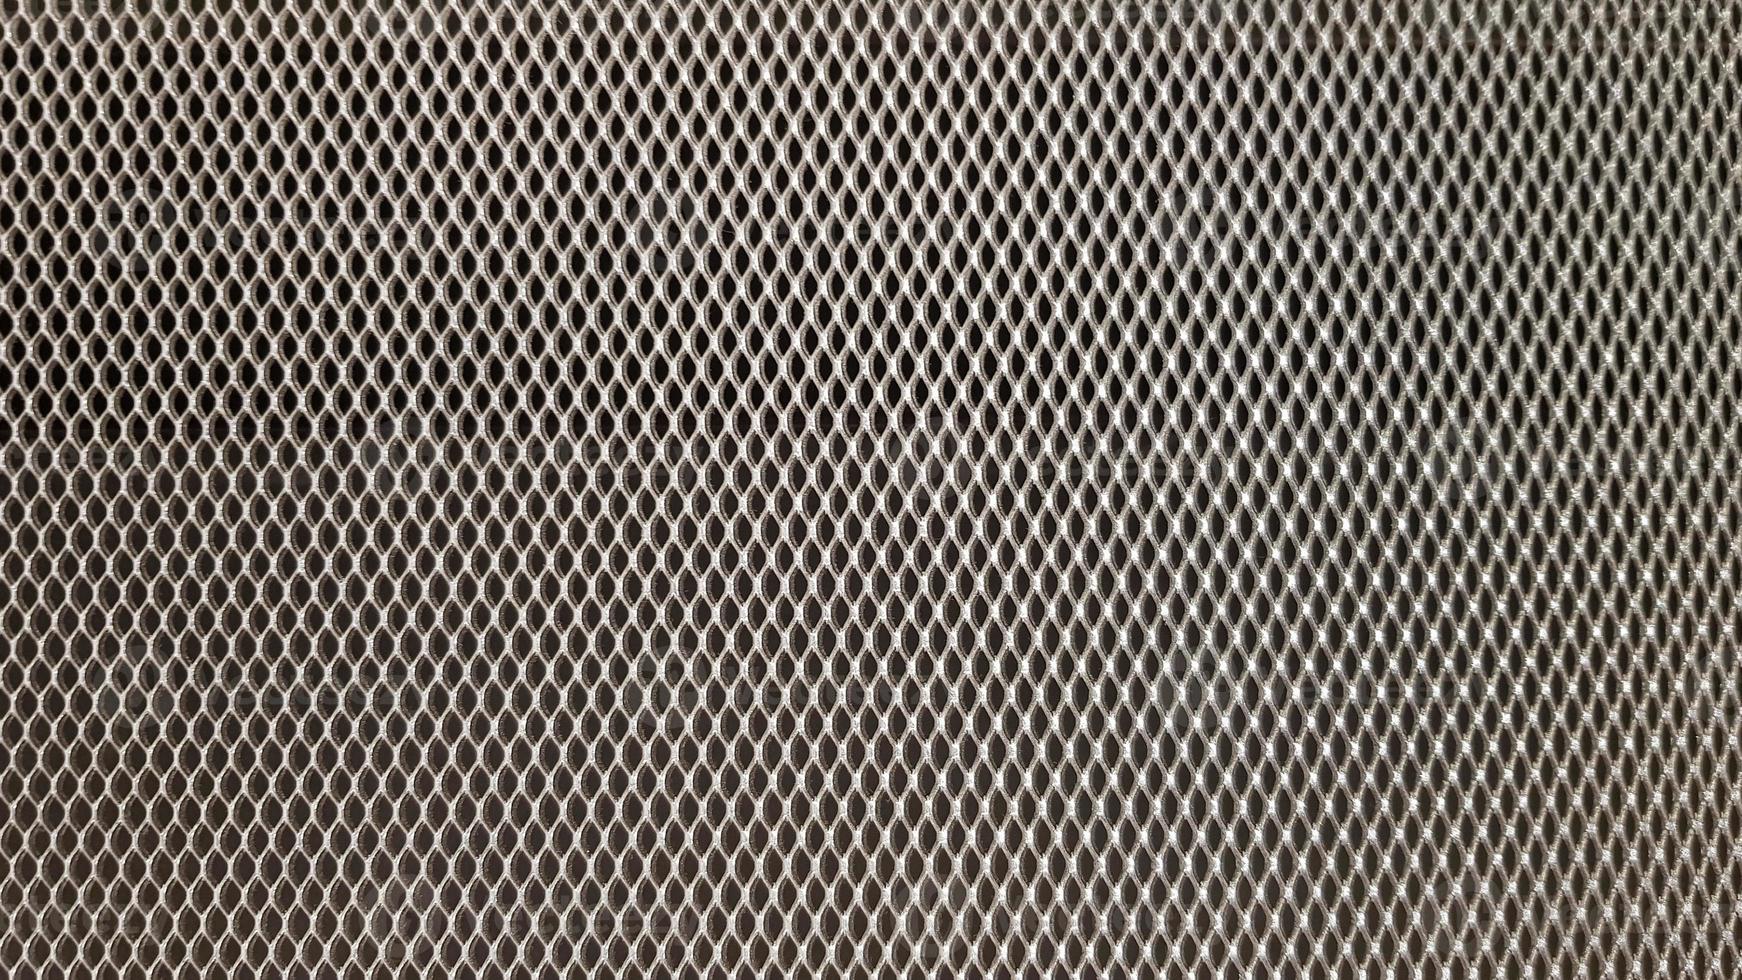 Abstract industrial metallic netting background, pattern, texture. Mesh gray background photo